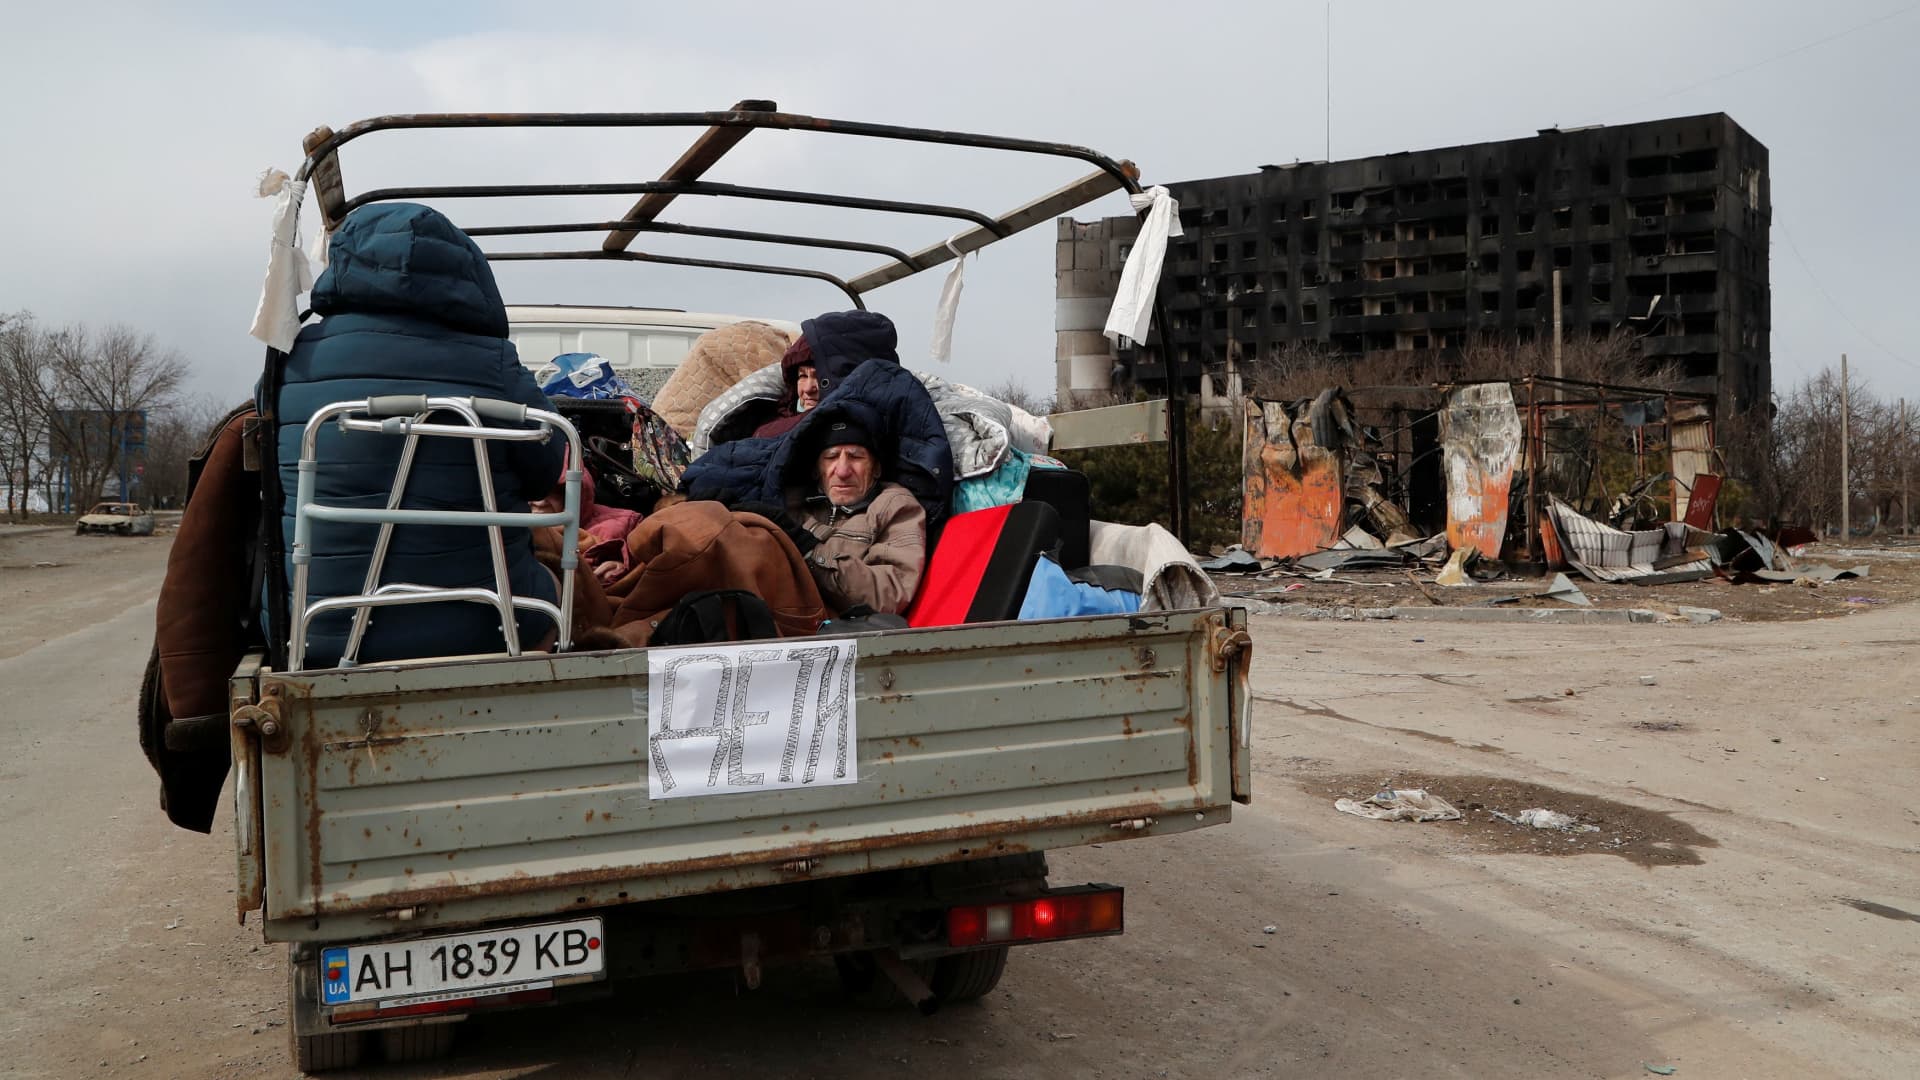 Evacuees fleeing Ukraine-Russia conflict sit in the body of a cargo vehicle while waiting in a line to leave the besieged southern port city of Mariupol, Ukraine March 17, 2022.